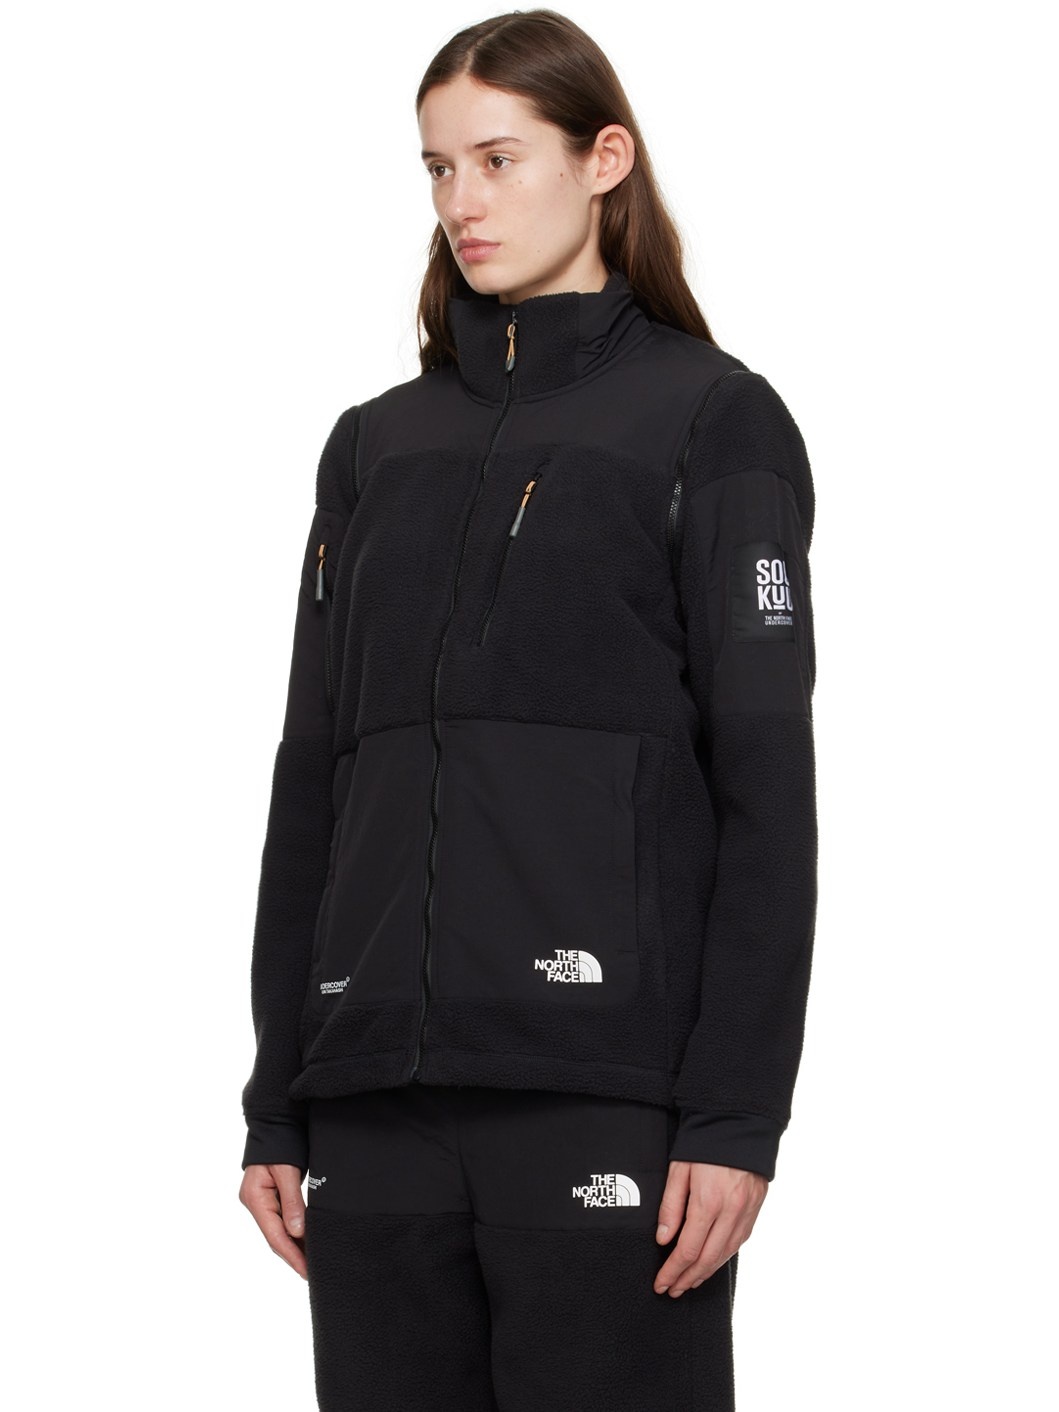 Black The North Face Edition Jacket - 4